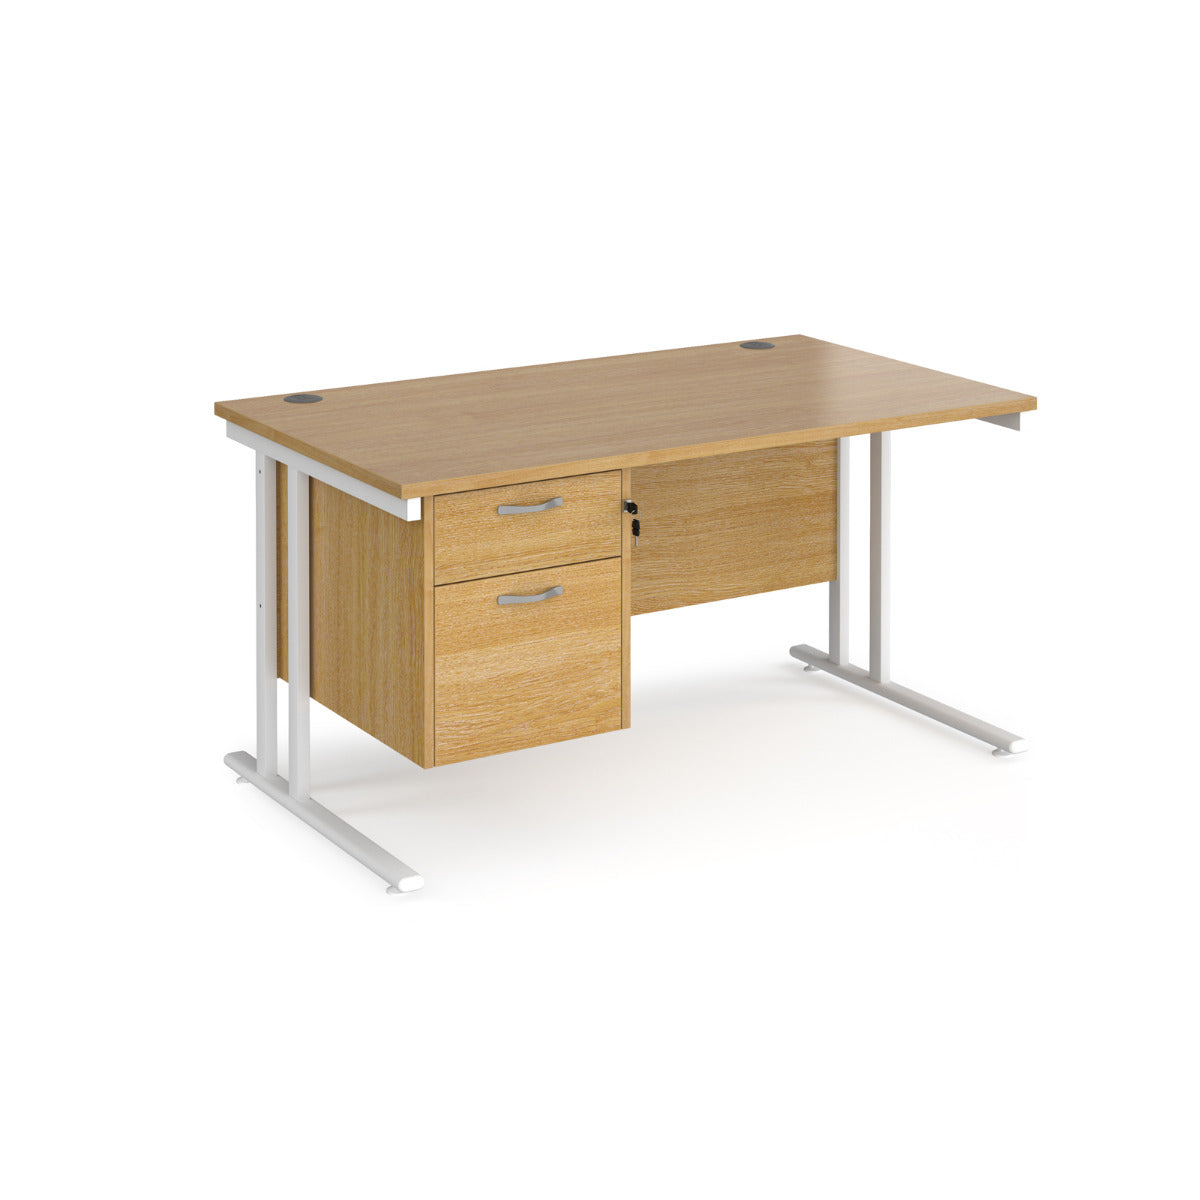 Maestro 800mm Deep Straight Cantilever Leg Office Desk with Two Drawer Pedestal